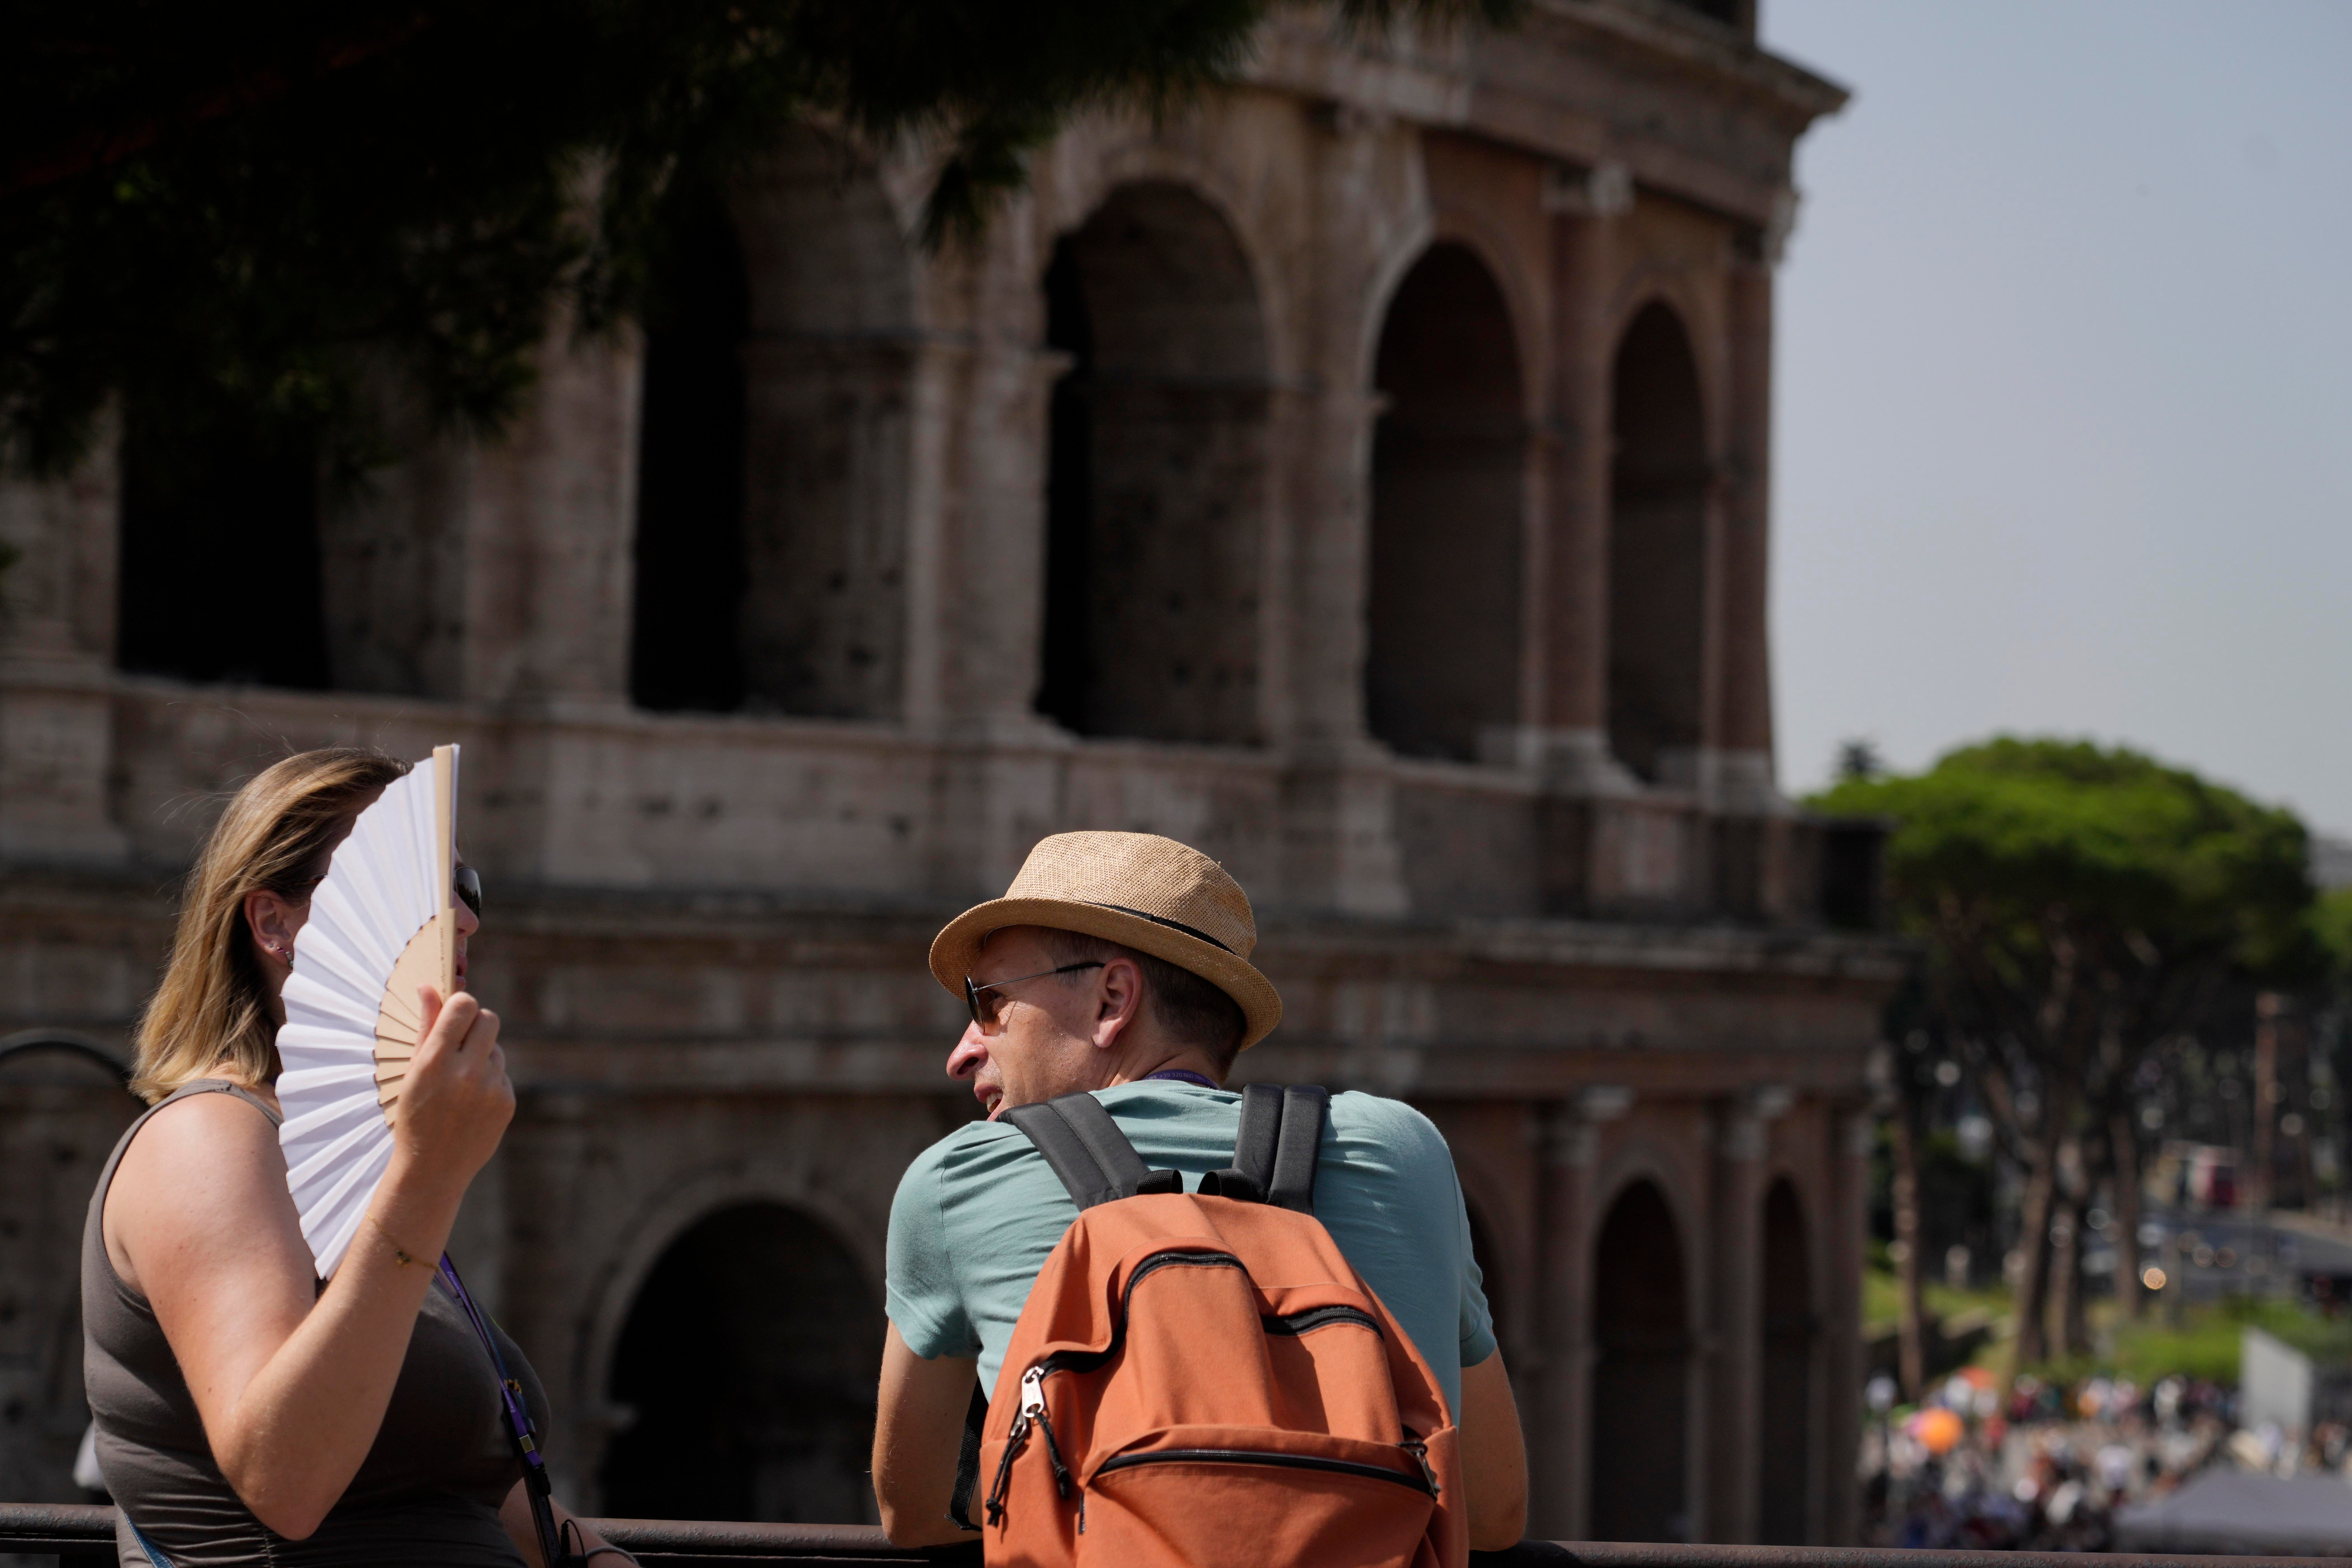 Tourists stops in front of the Colosseum in Rome